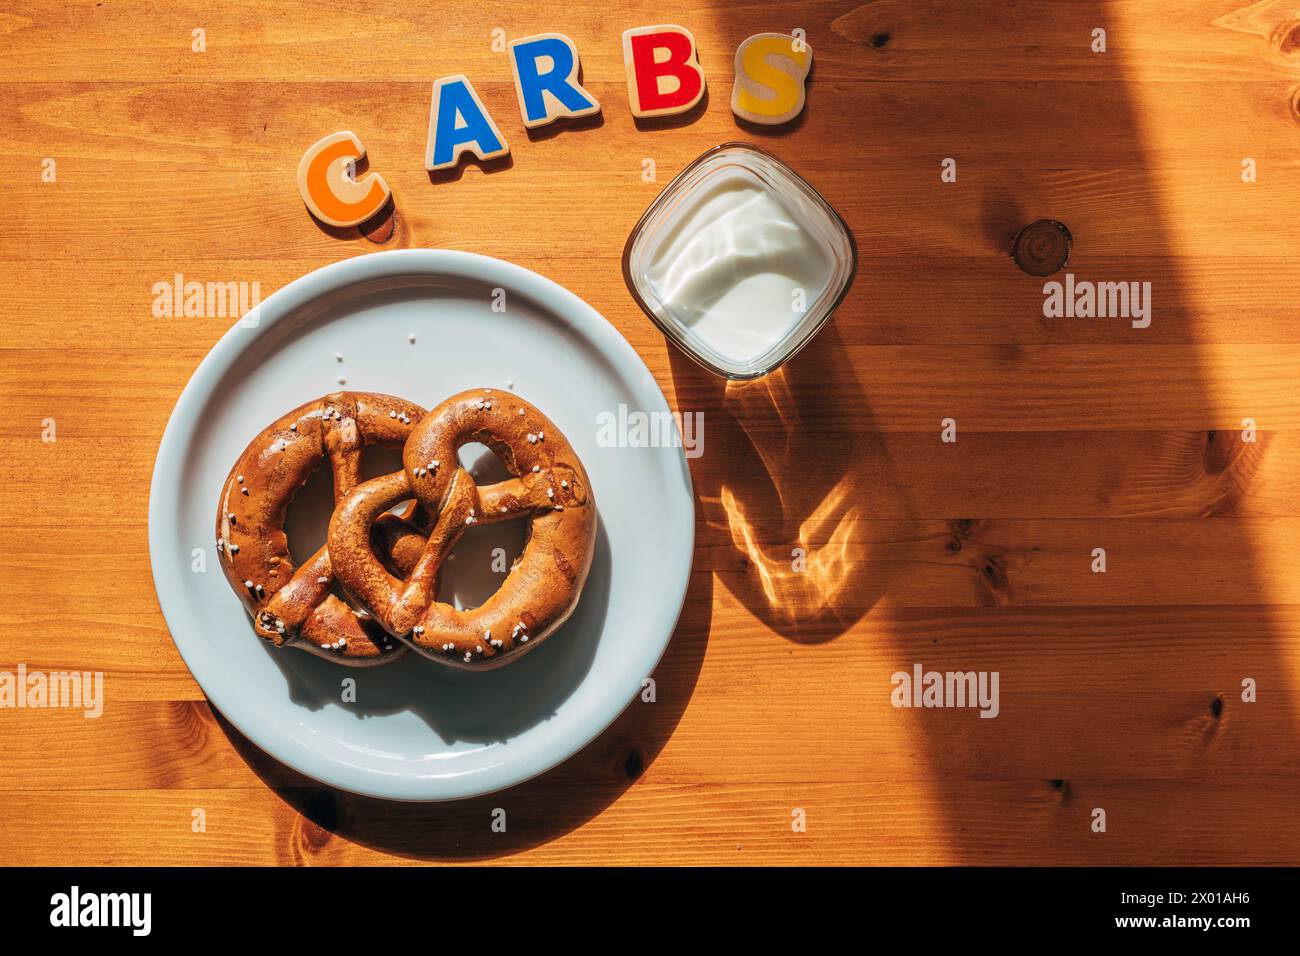 Carbs for breakfast concept, glass of yogurt and two pretzels on a plate on the table in the morning, selective focus Stock Photo